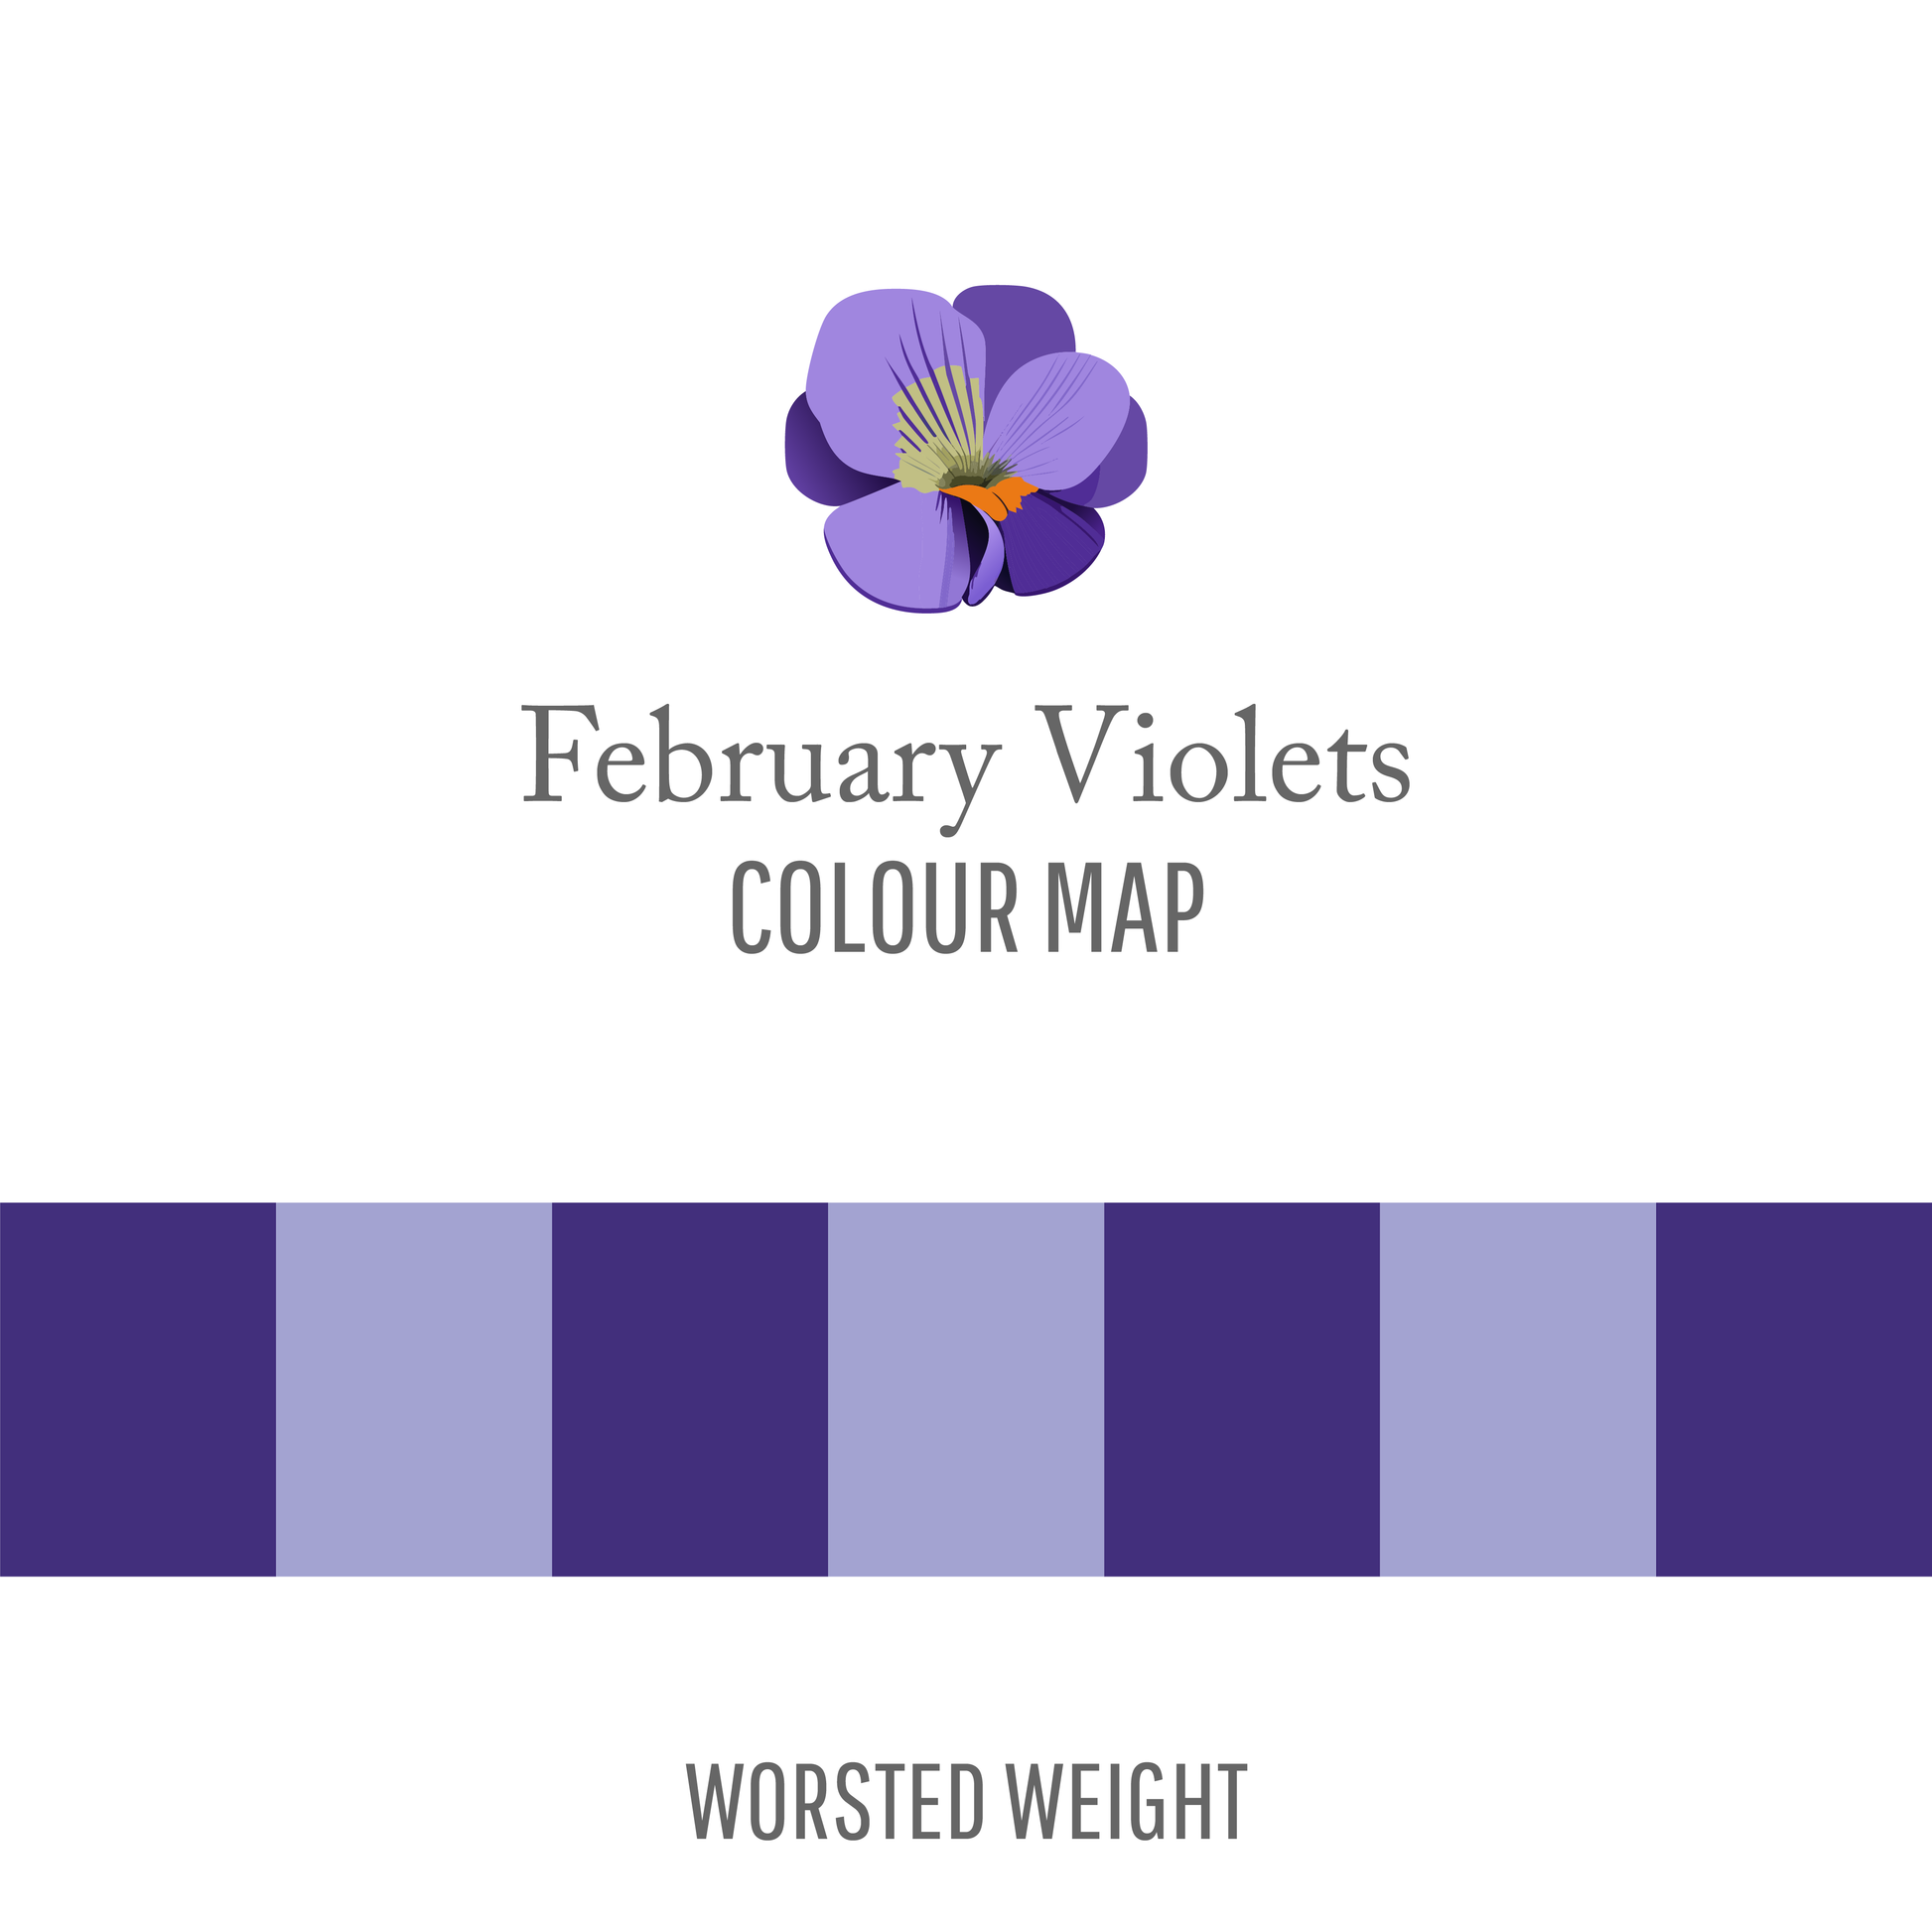 February Violets colour map worsted weight